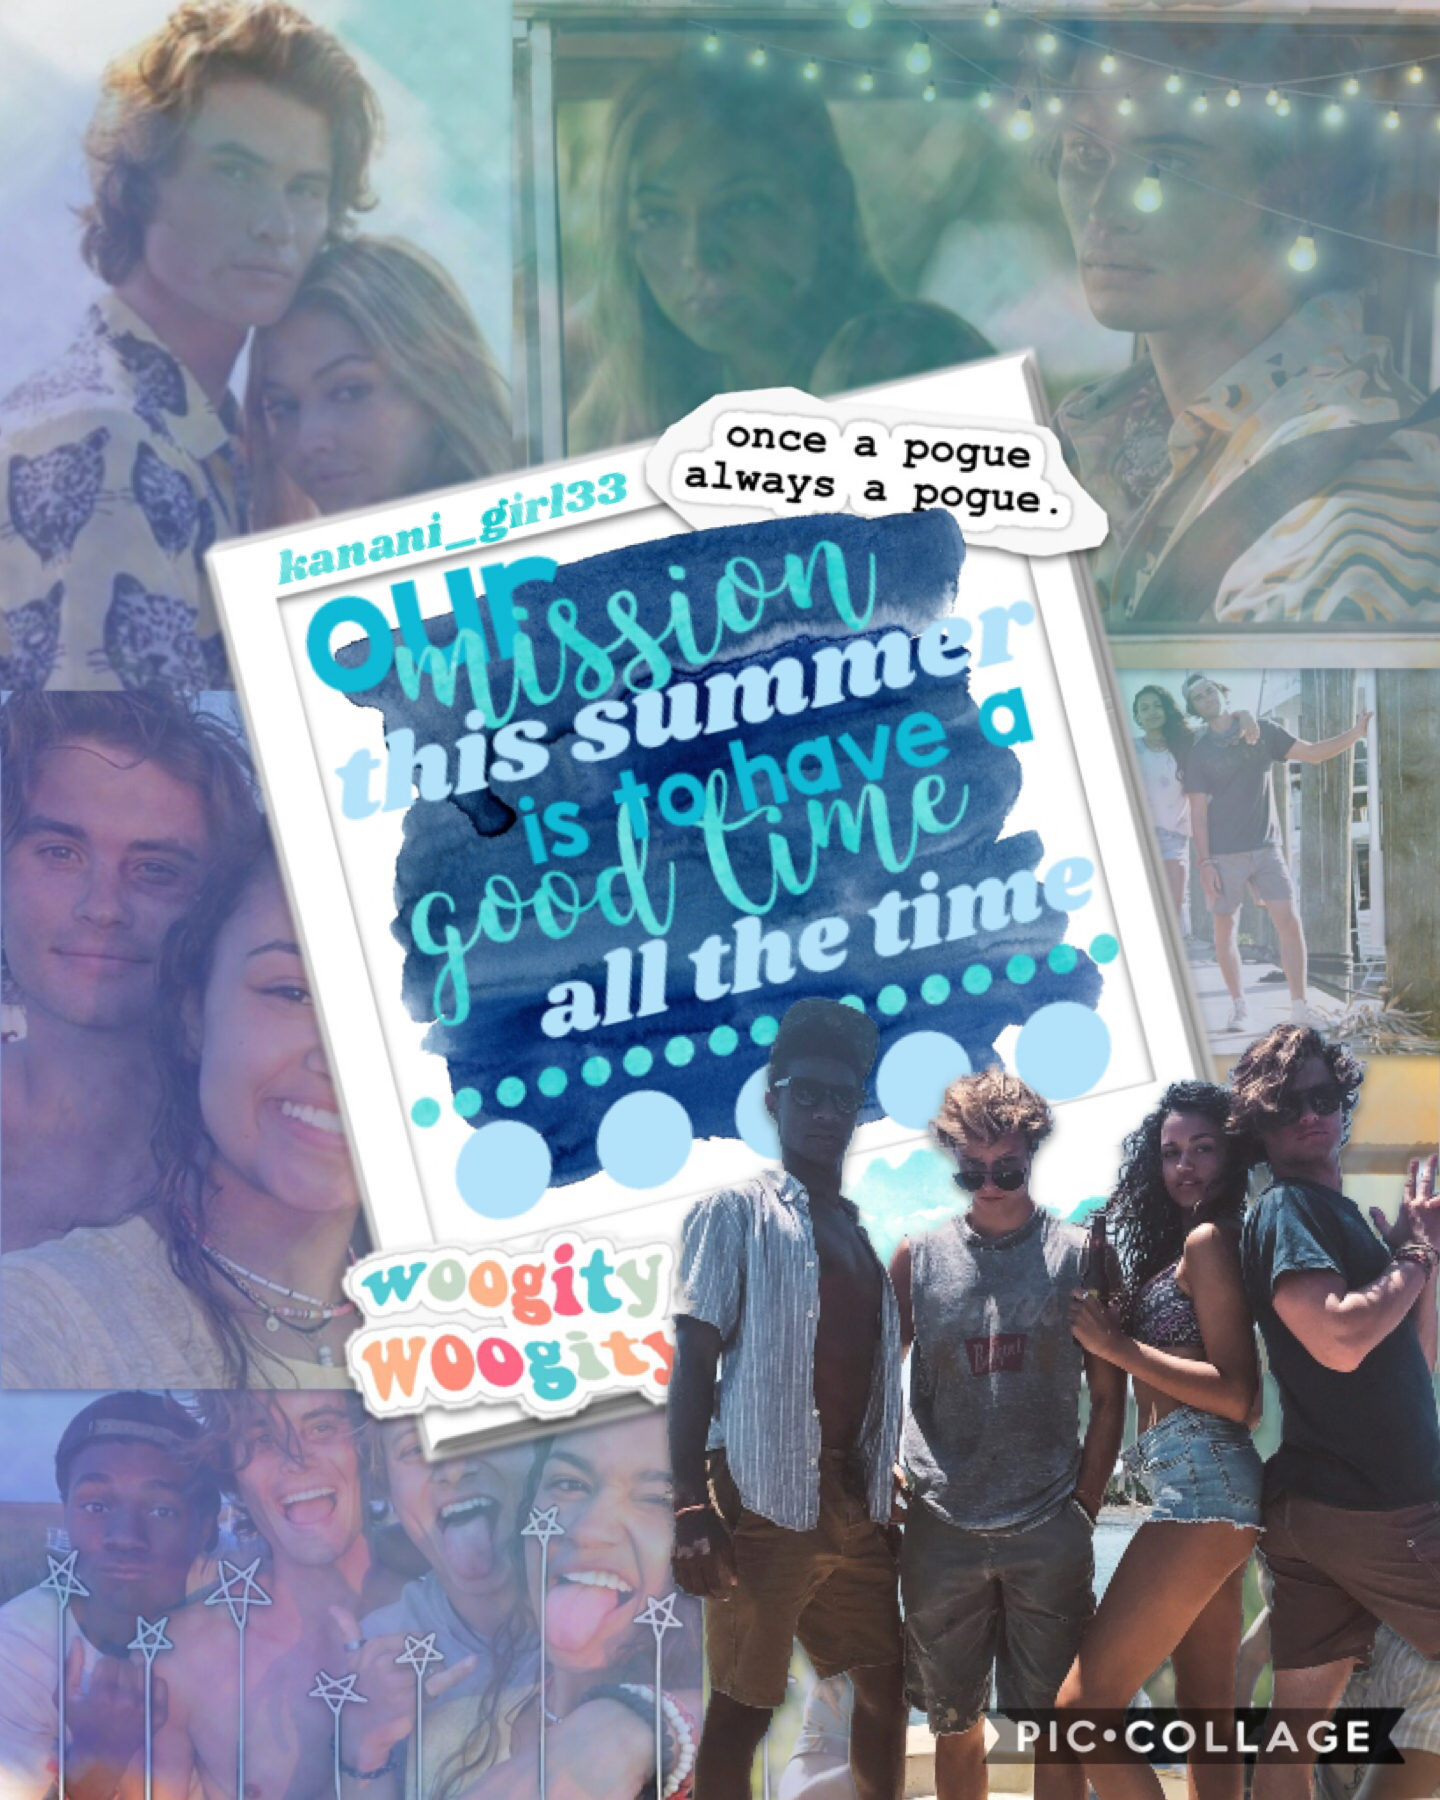 🌊tap🌊
☆august 1, 2020☆
happy august everyone 💙 if you haven’t already, definitely watch outer banks on netflix!! if u have any netflix suggestions leave them down below! comment a 🌊 for a possible shoutout!! today’s shoutout goes to @dancingintheraine 🦋